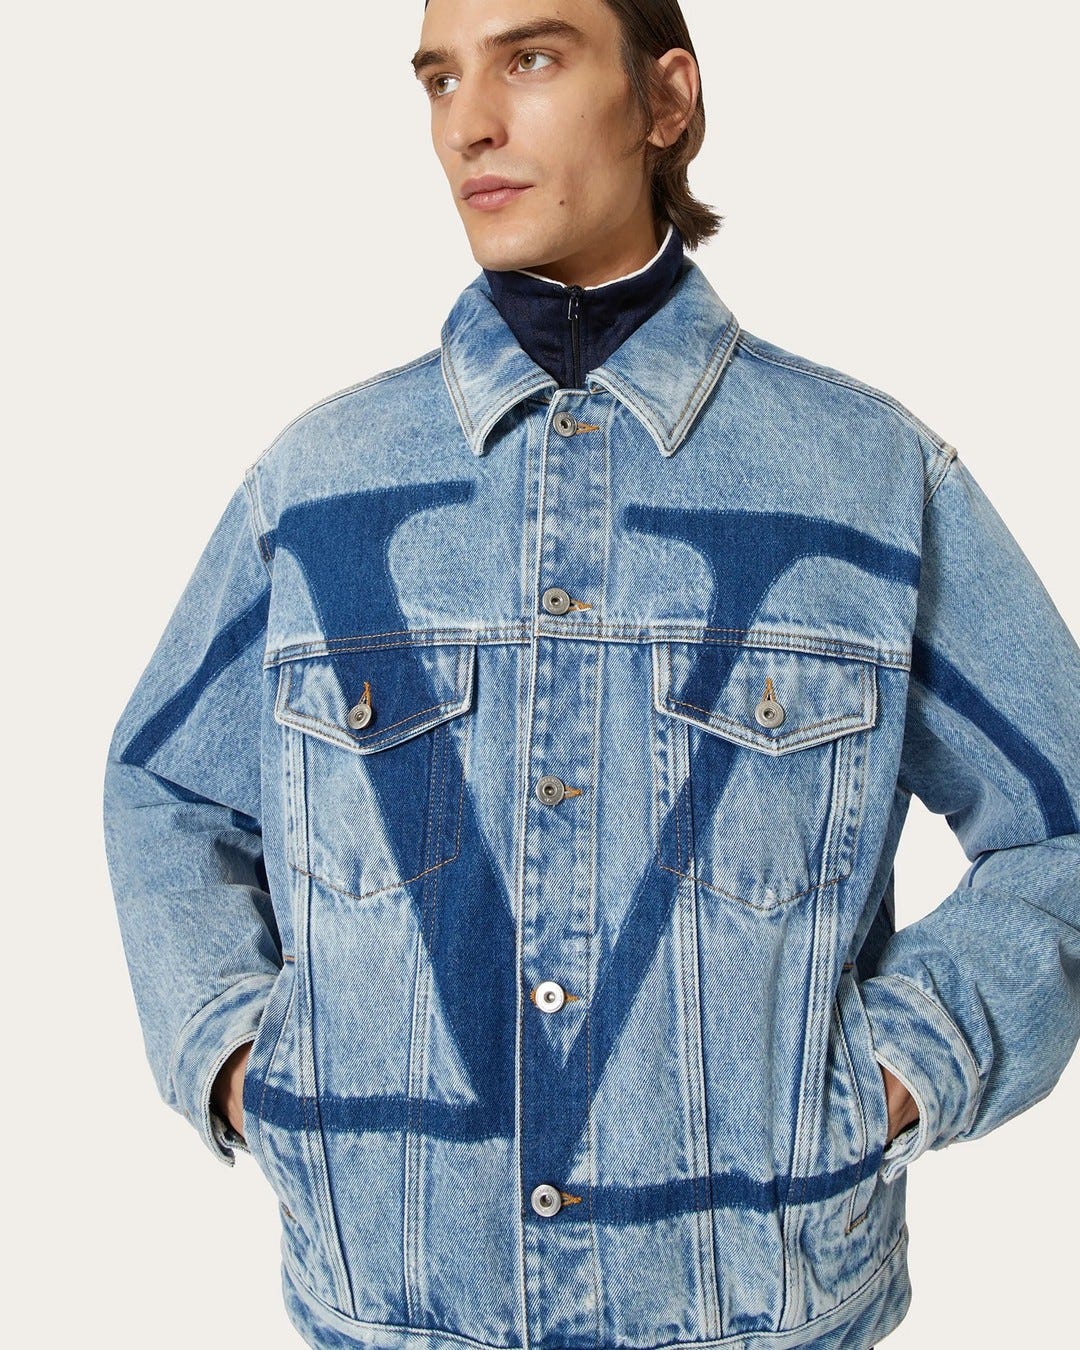 BLUE DENIM: this VLogo signature denim jacket from @maisonvalentino is the statement transitional piece you've been waiting for this season.
Available on genteroma.com and in store at Via del Babuino, 185.

#GenteRoma #ValentinoGaravani #SS22